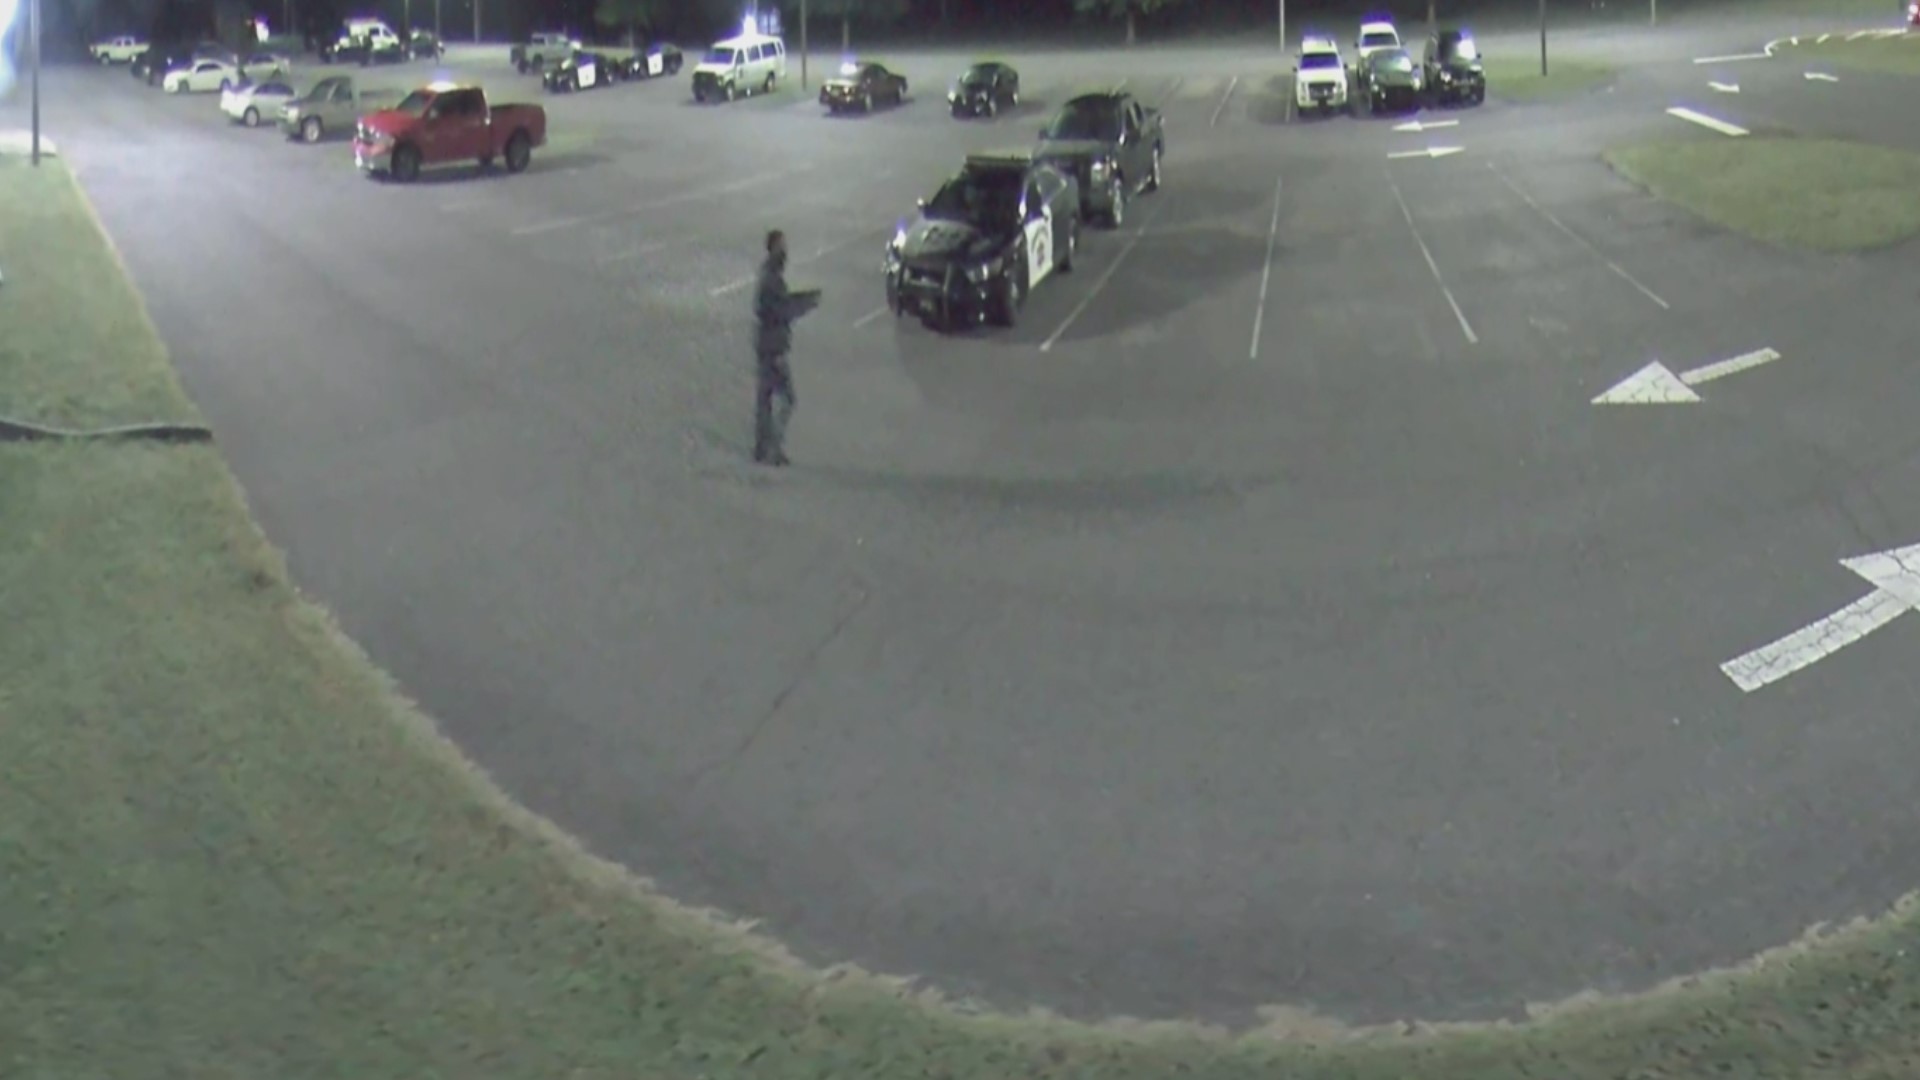 Surveillance video from the sheriff's office shows the man walking across the parking lot and pointing a gun. No one was hurt, the sheriff said.